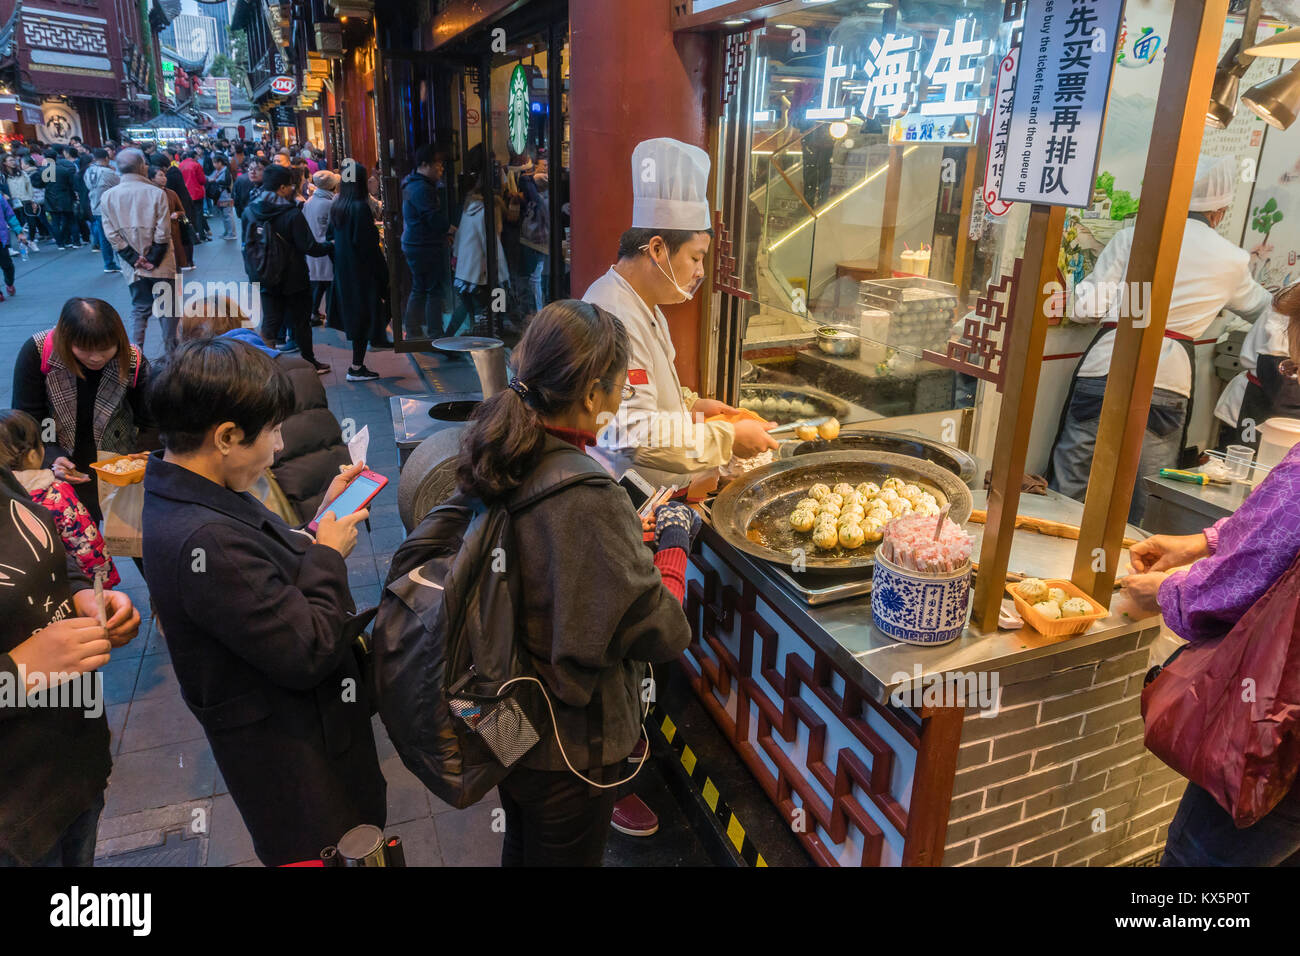 People buying pan fried Shanghai dumpling at a food stall Stock Photo